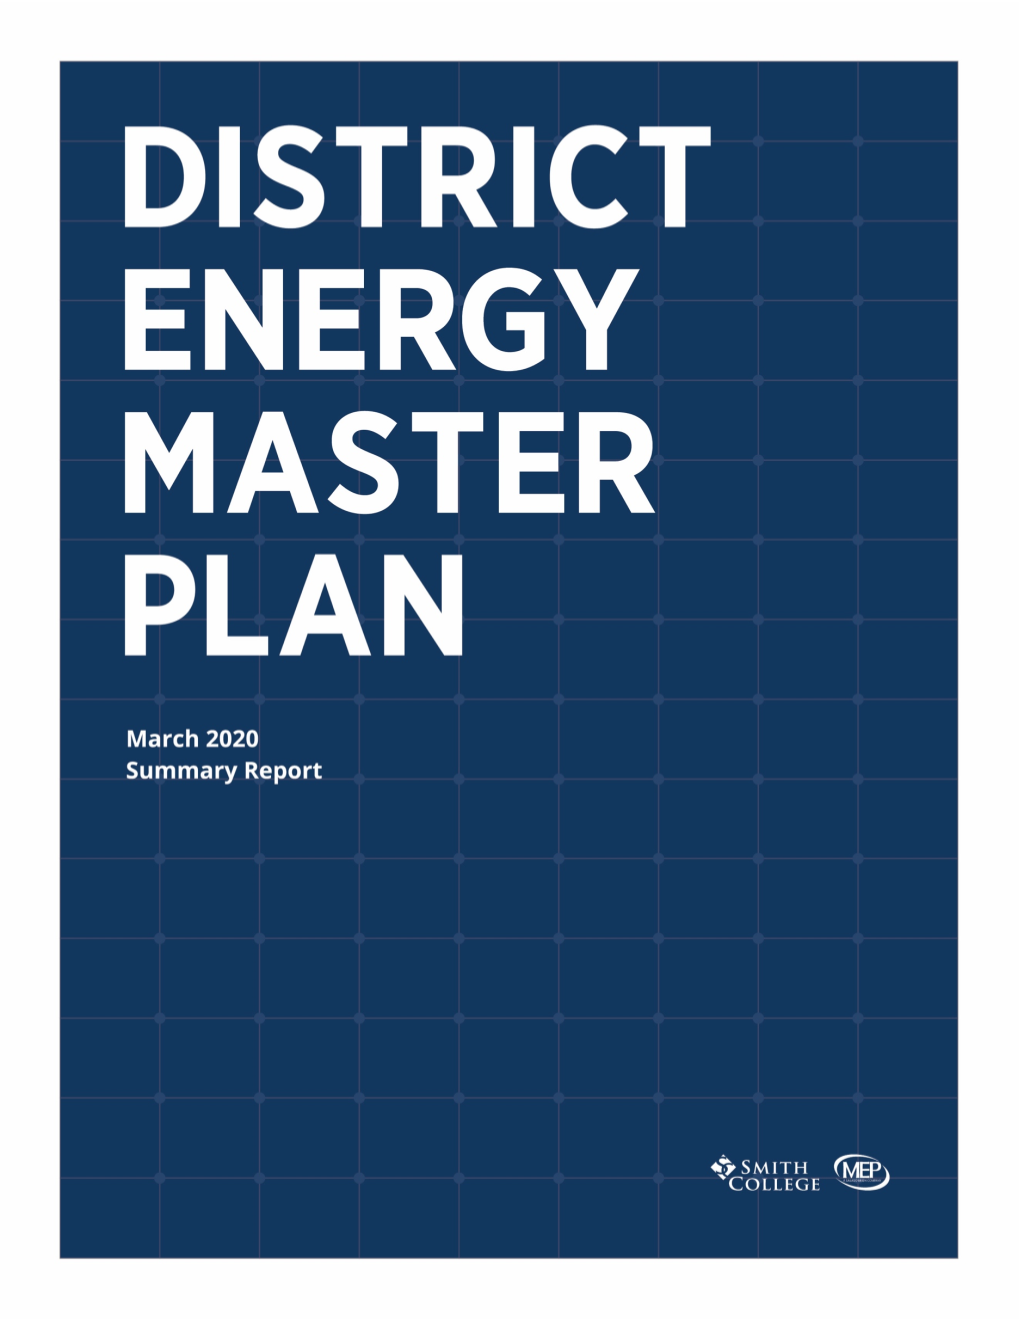 Smith District Energy Master Plan March 2020 Summary Report